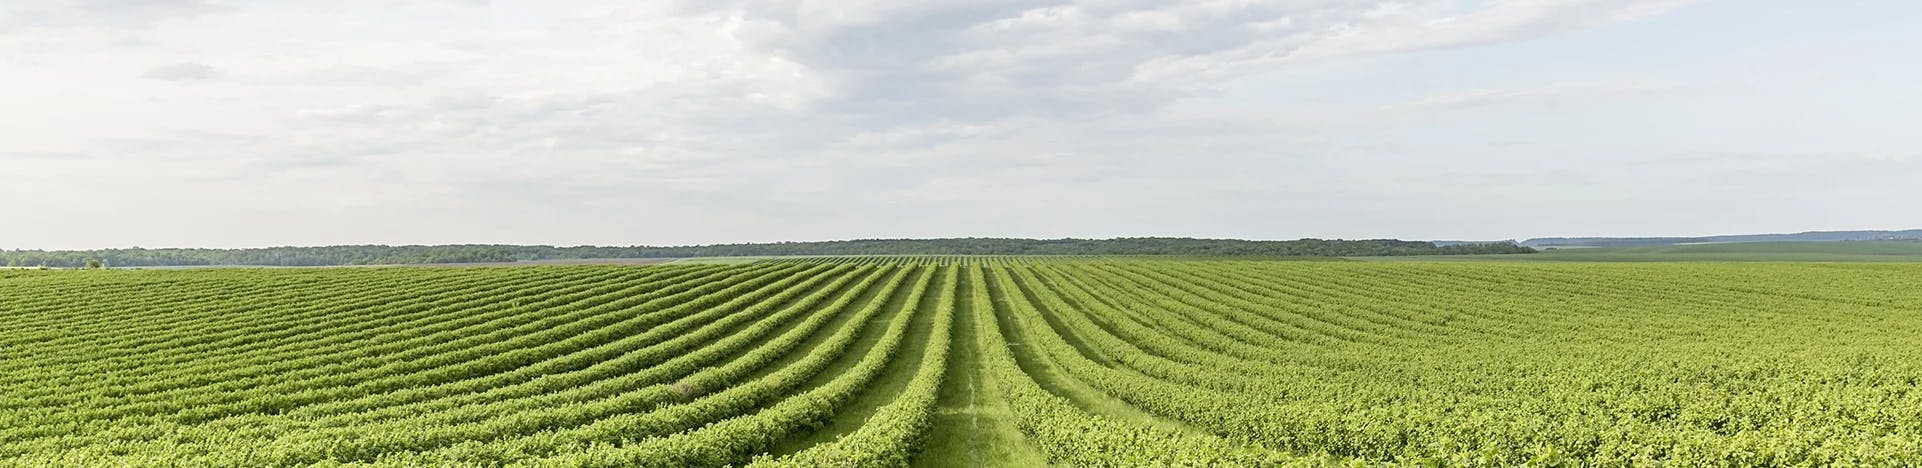 agriculture-section-image